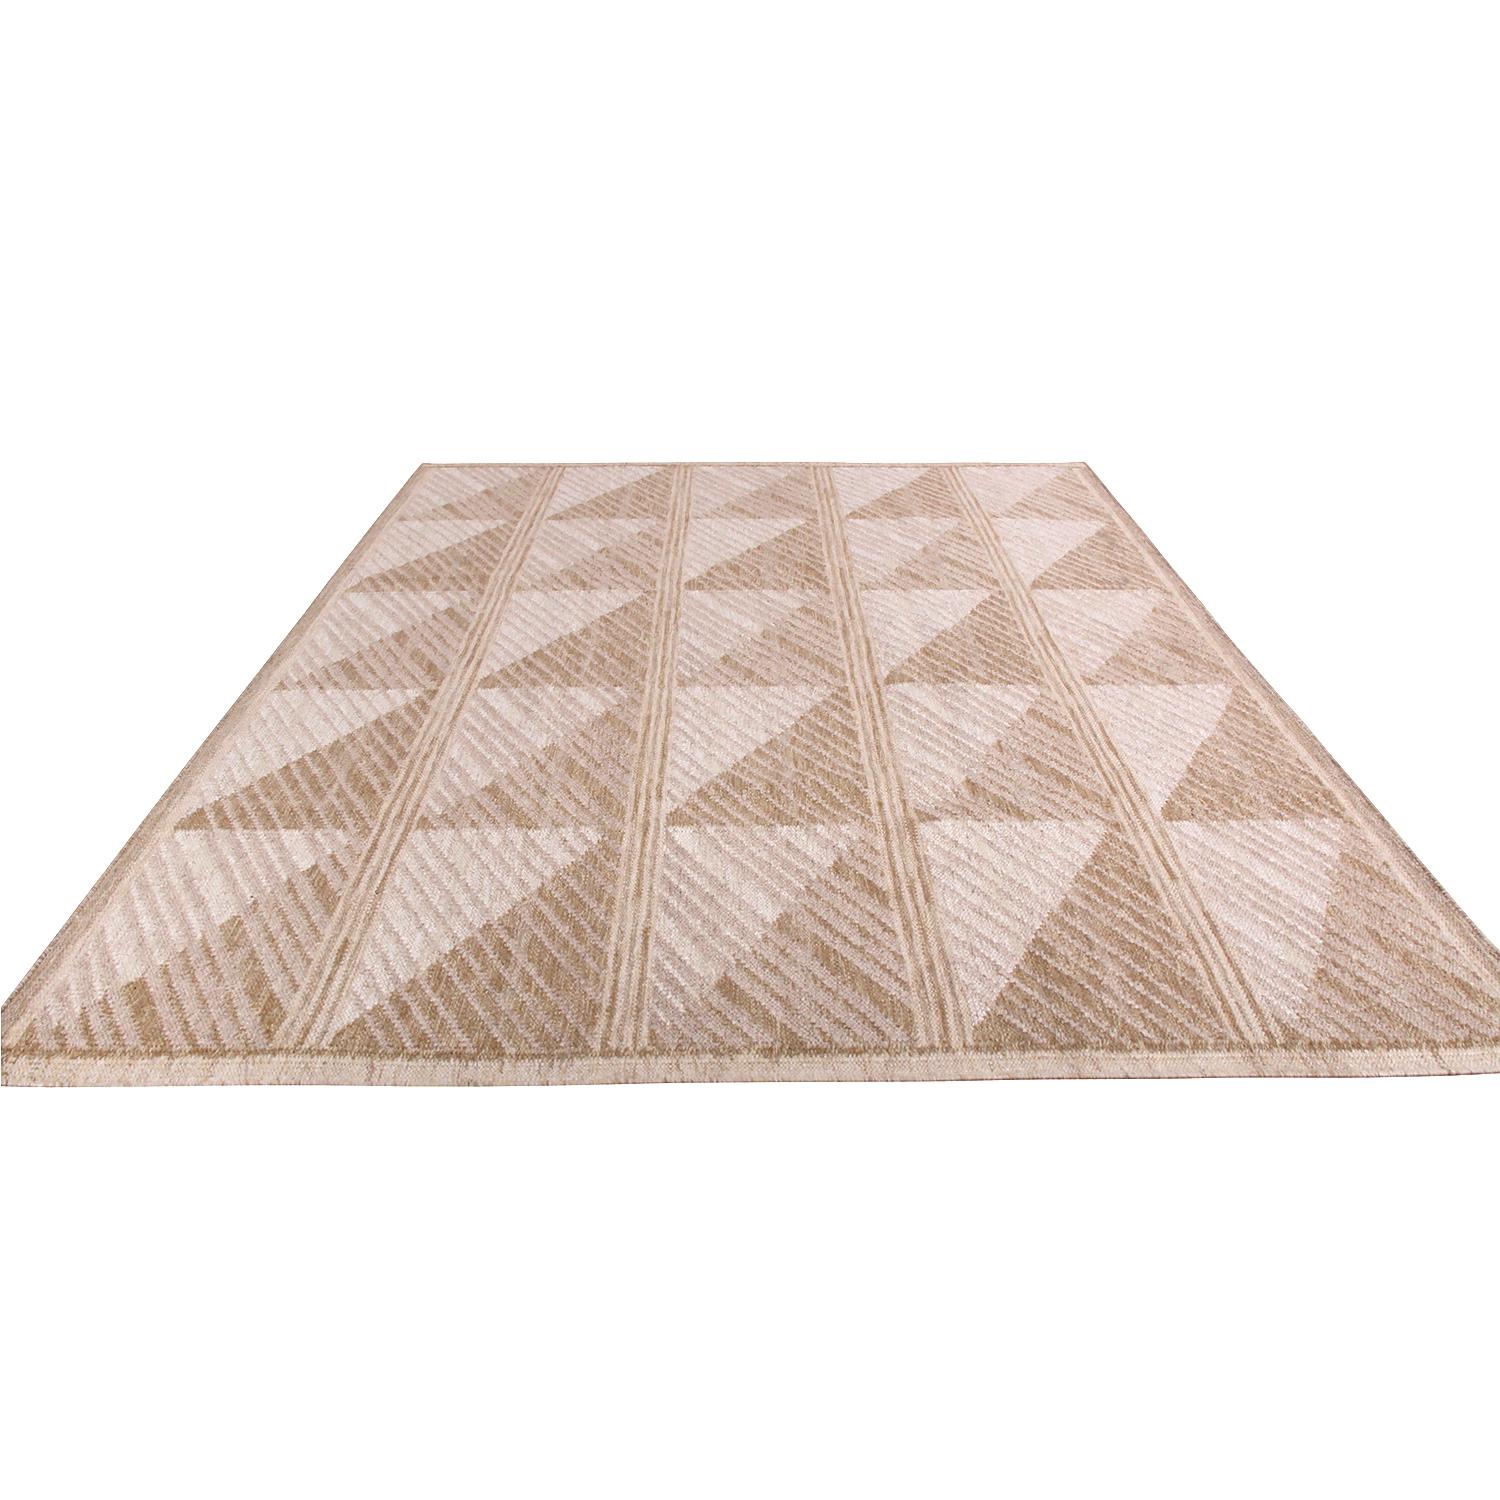 Hand woven in wool with a unique blend of natural undyed yarns, this modern kilim rug hails from the latest flat weave additions to Rug & Kilim’s Scandinavian Kilim Collection, a celebration of Swedish modernism with new large-scale geometry and